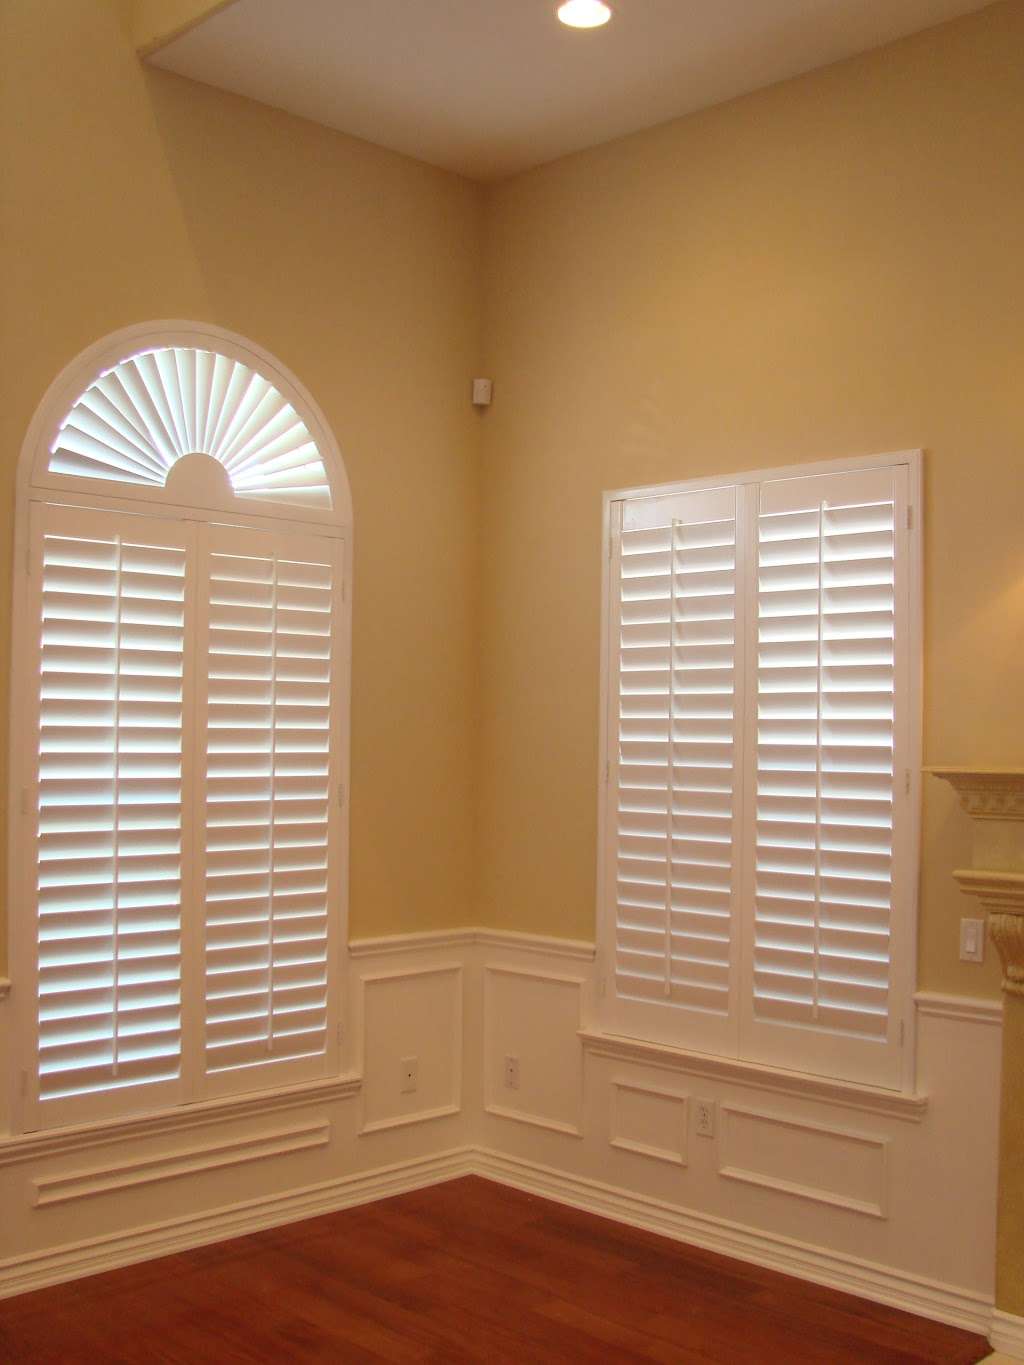 Shop At Home Blinds | 1825 Durfee Ave # A, South El Monte, CA 91733 | Phone: (626) 443-3106